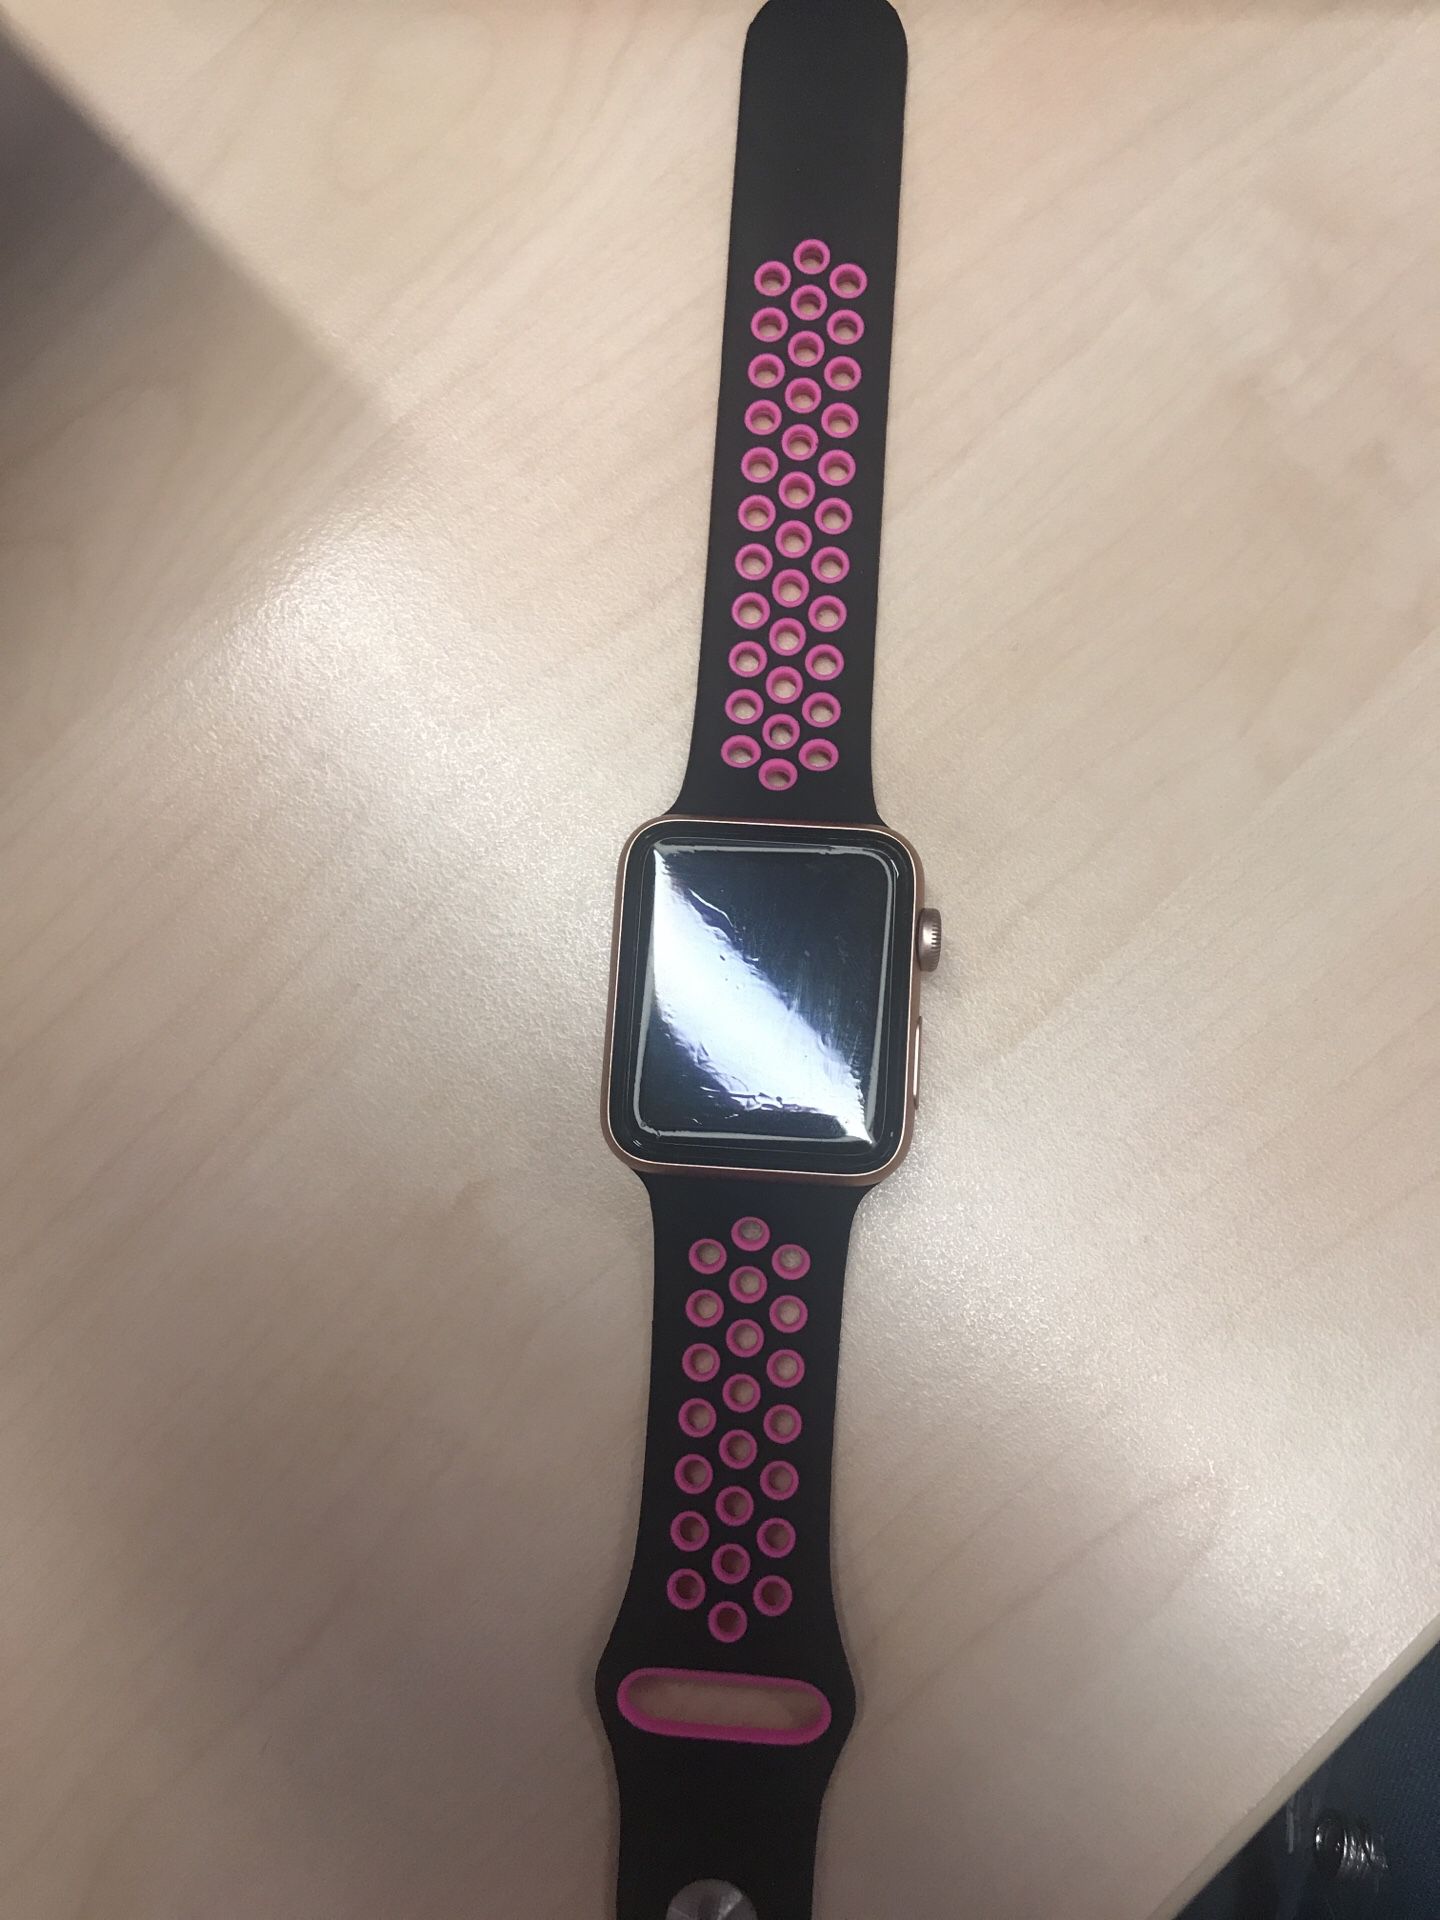 42 Series 3 Apple Watch rose gold with Cellular